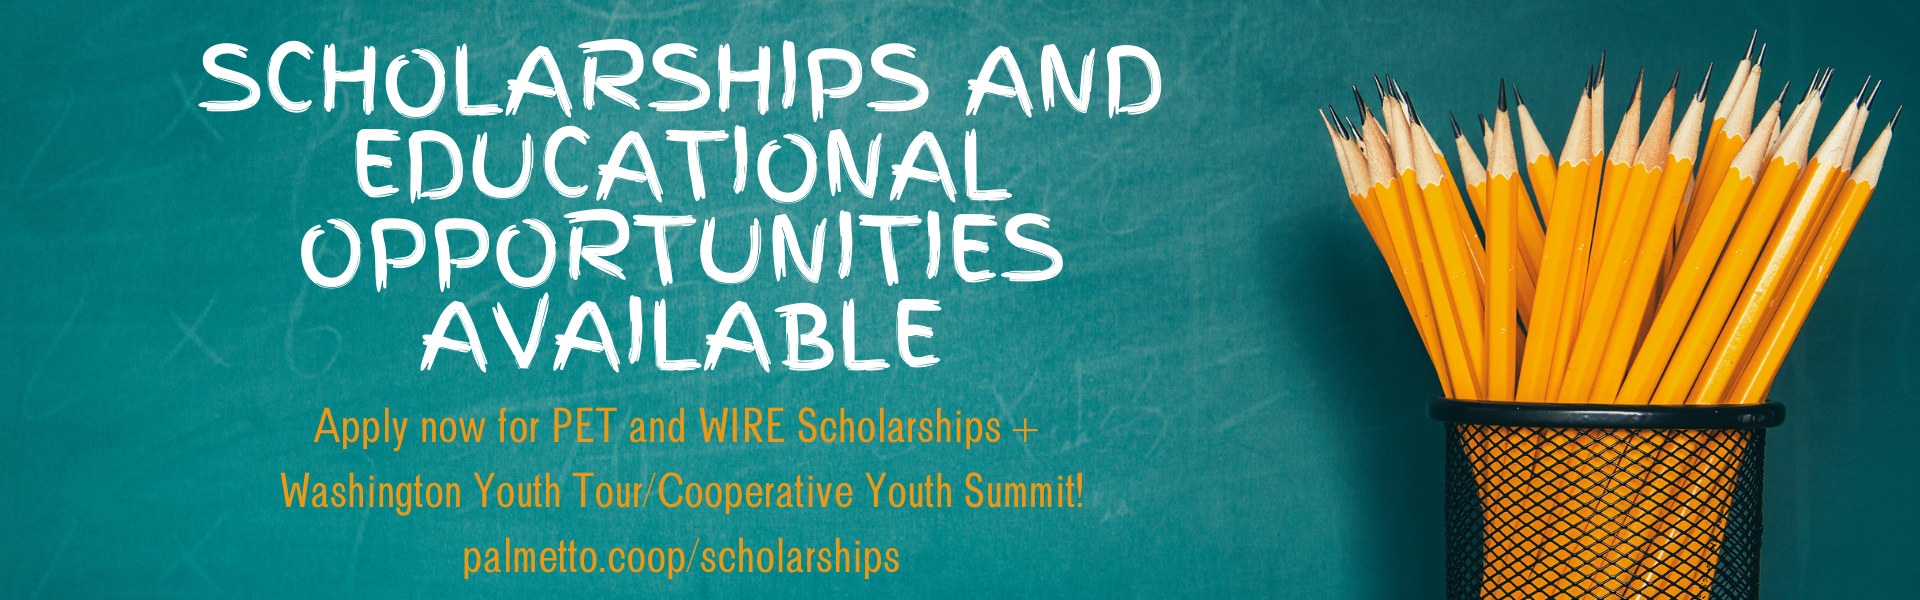 Scholarships and Educational Opportunities Available